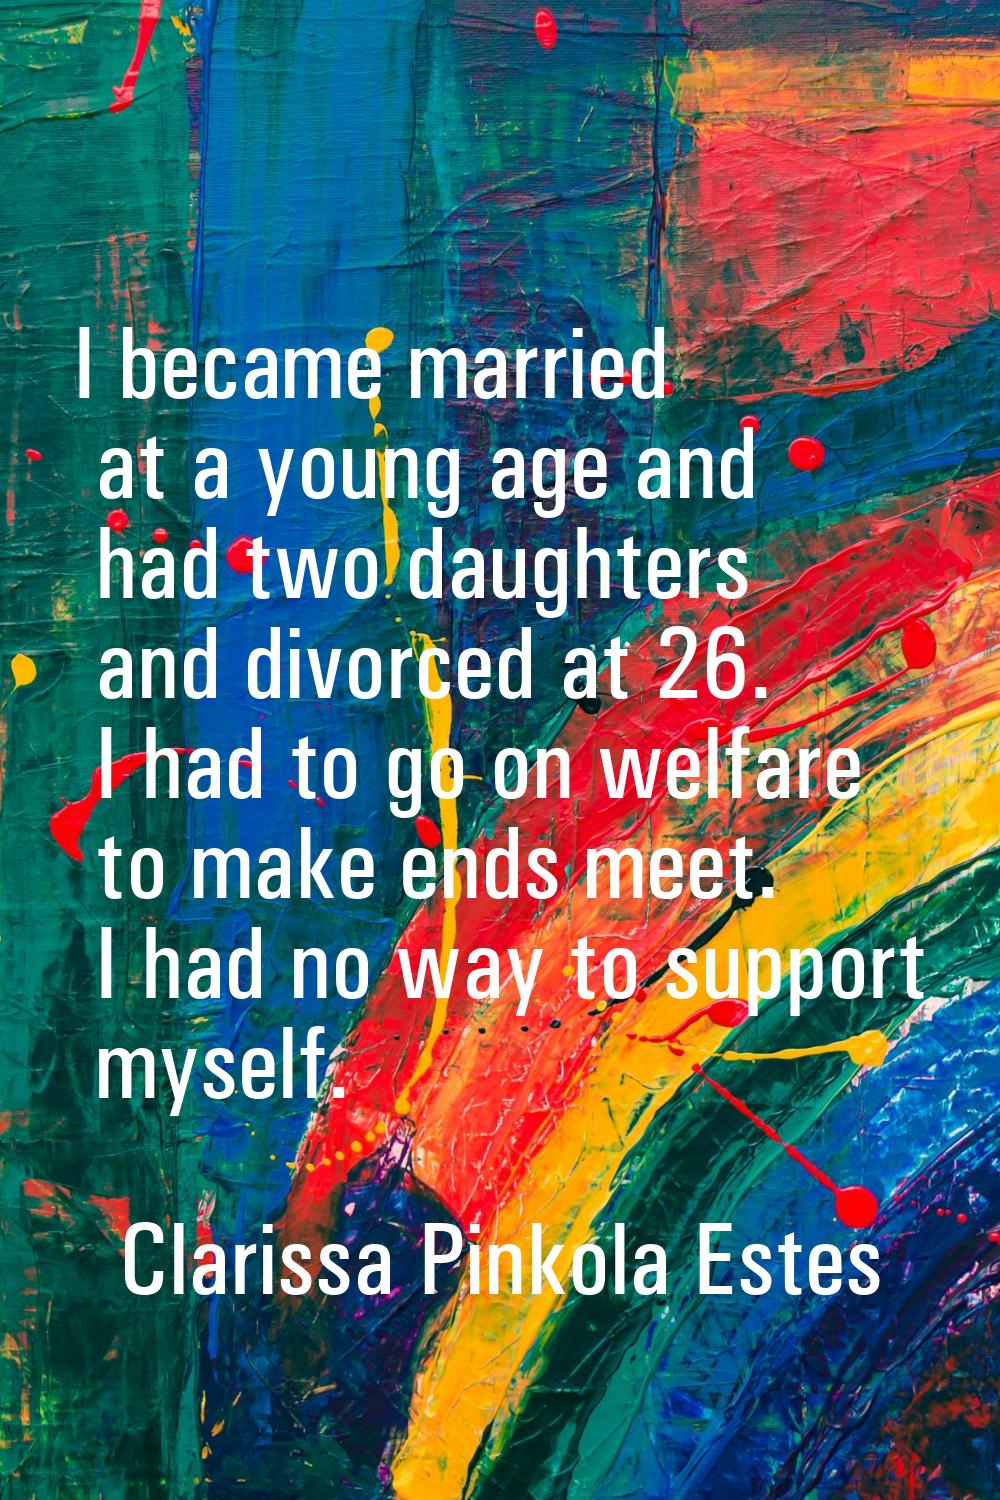 I became married at a young age and had two daughters and divorced at 26. I had to go on welfare to